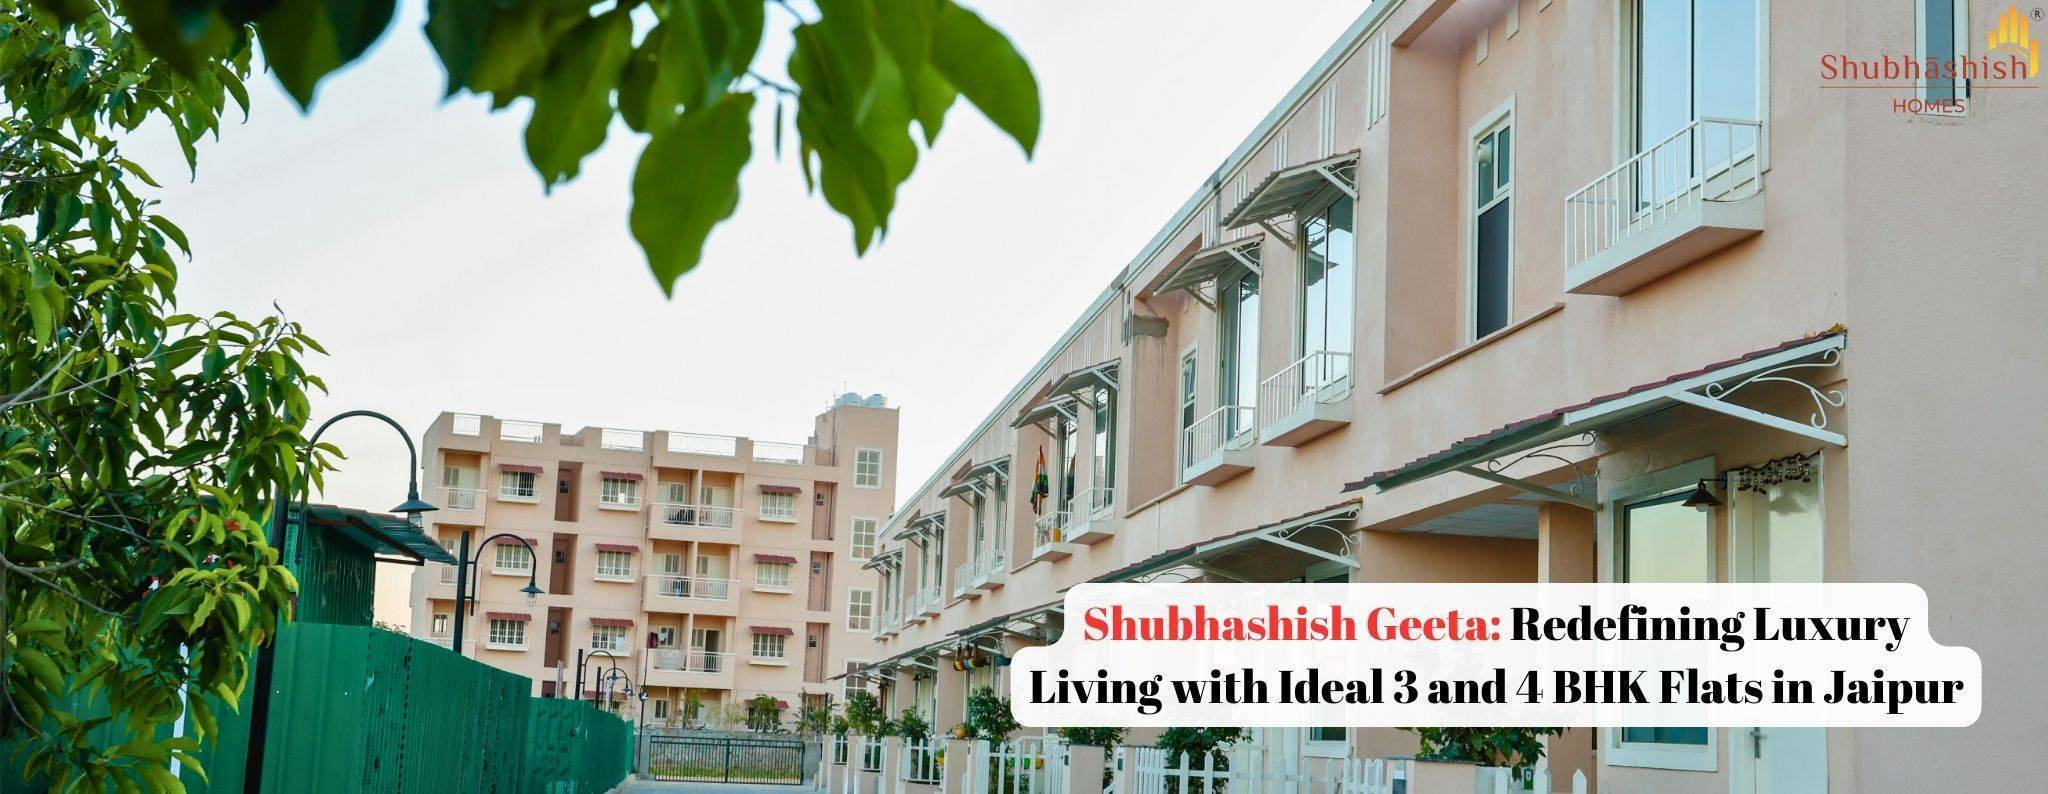 Shubhashish Geeta: Redefining Luxury Living with Ideal 3 and 4 BHK Flats in Jaipur